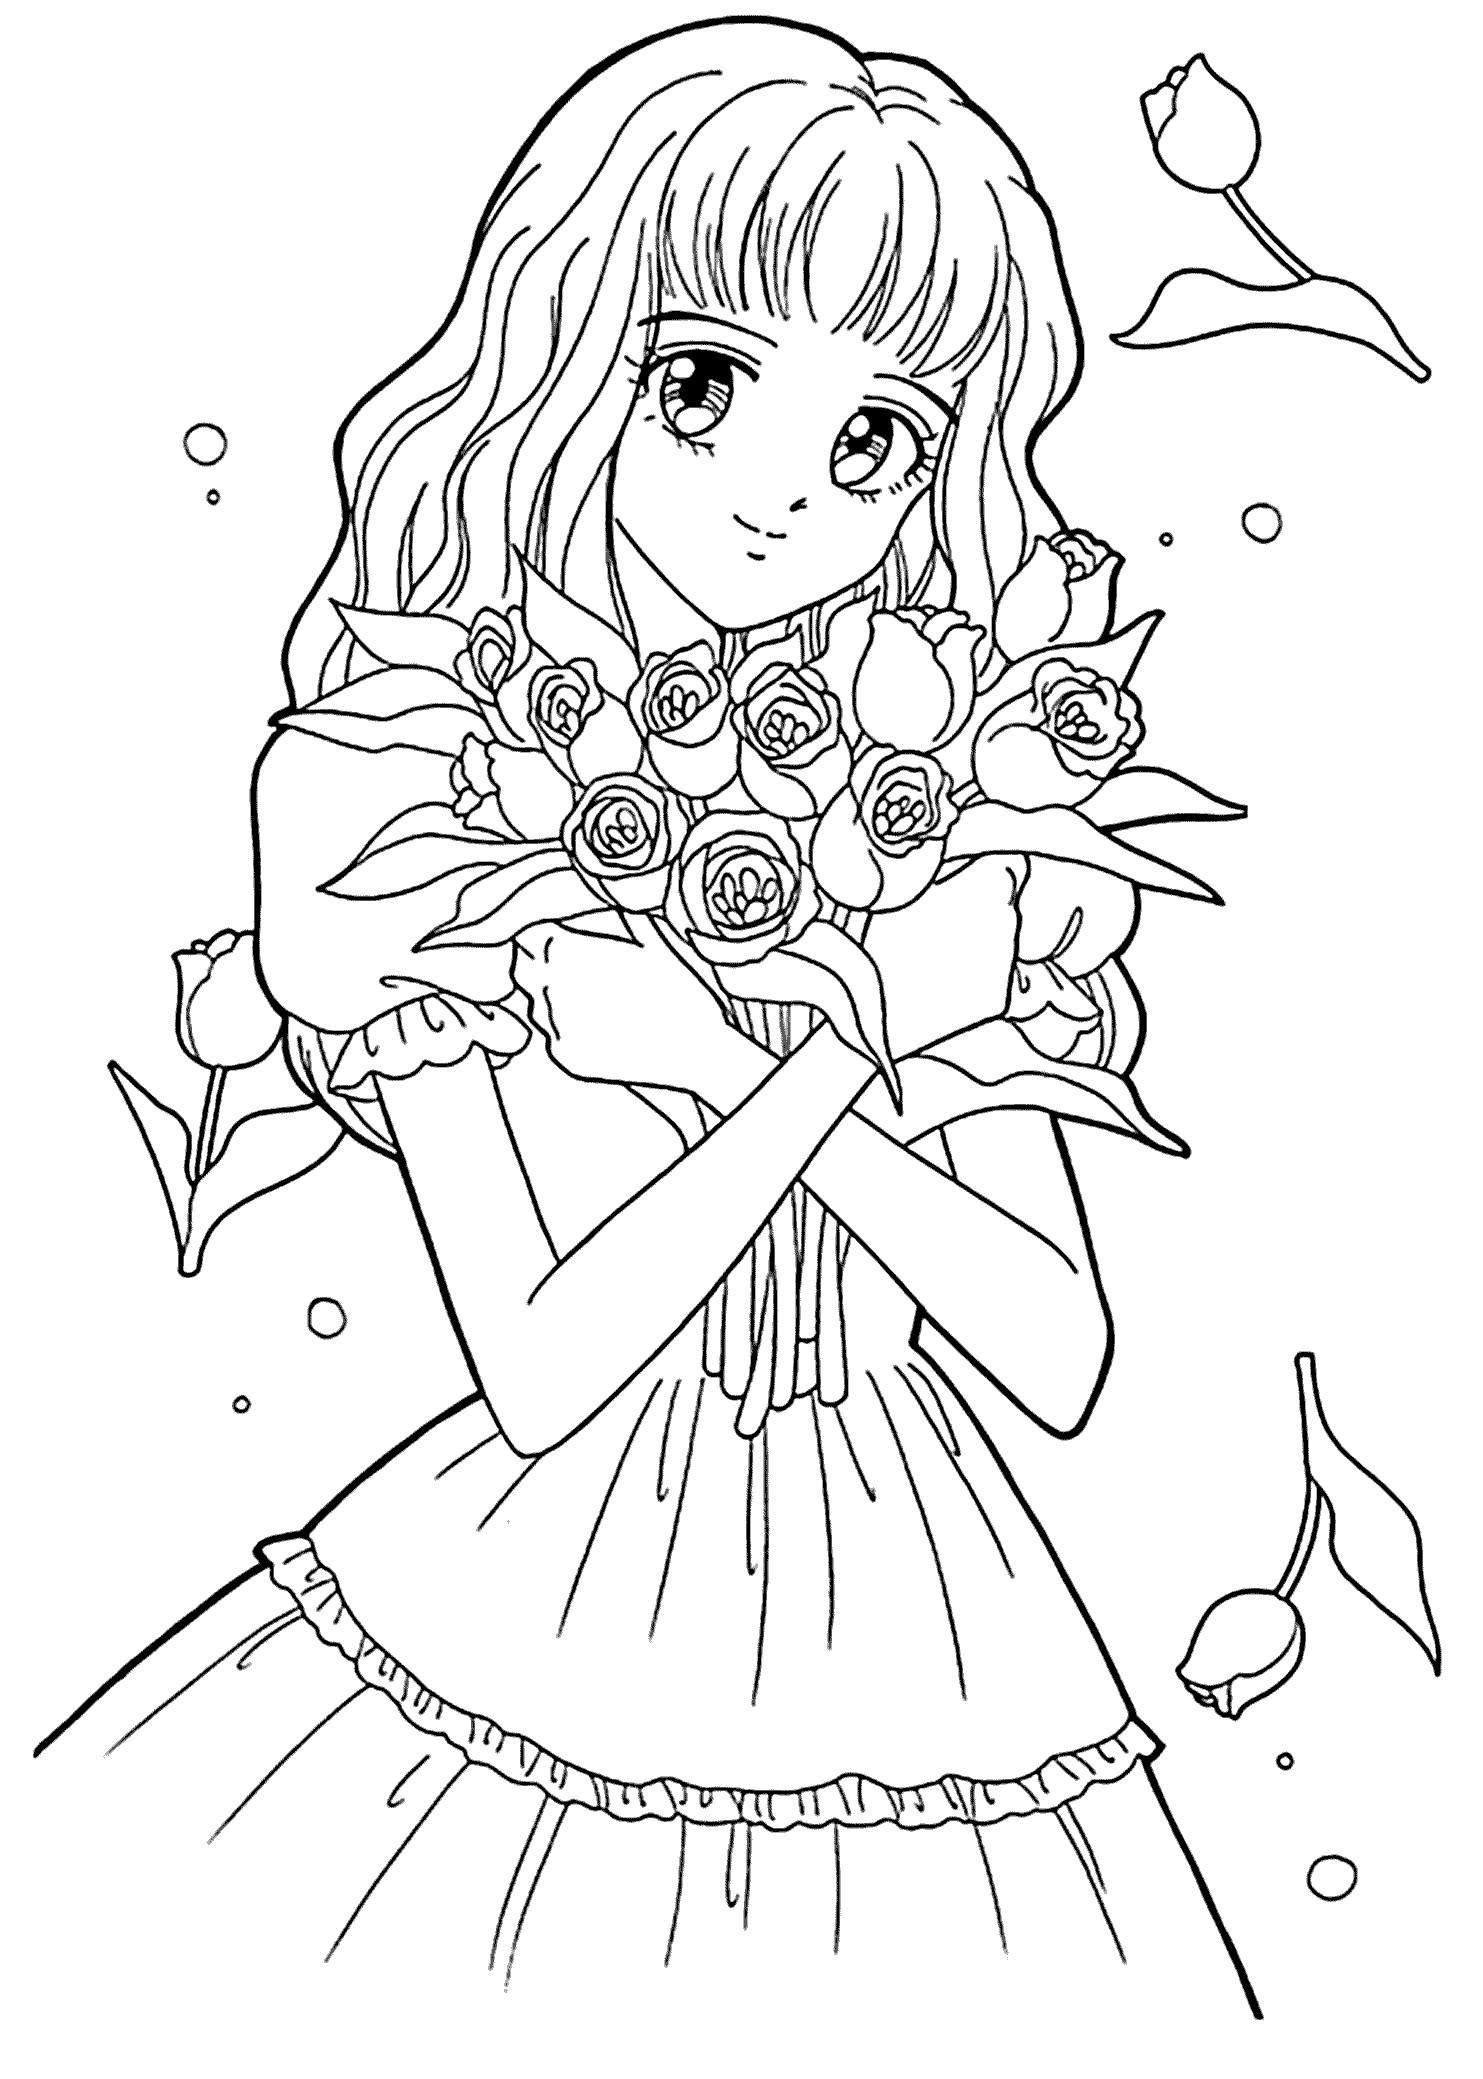 Printable Coloring Pages Girls
 Best Free Printable Coloring Pages for Kids and Teens